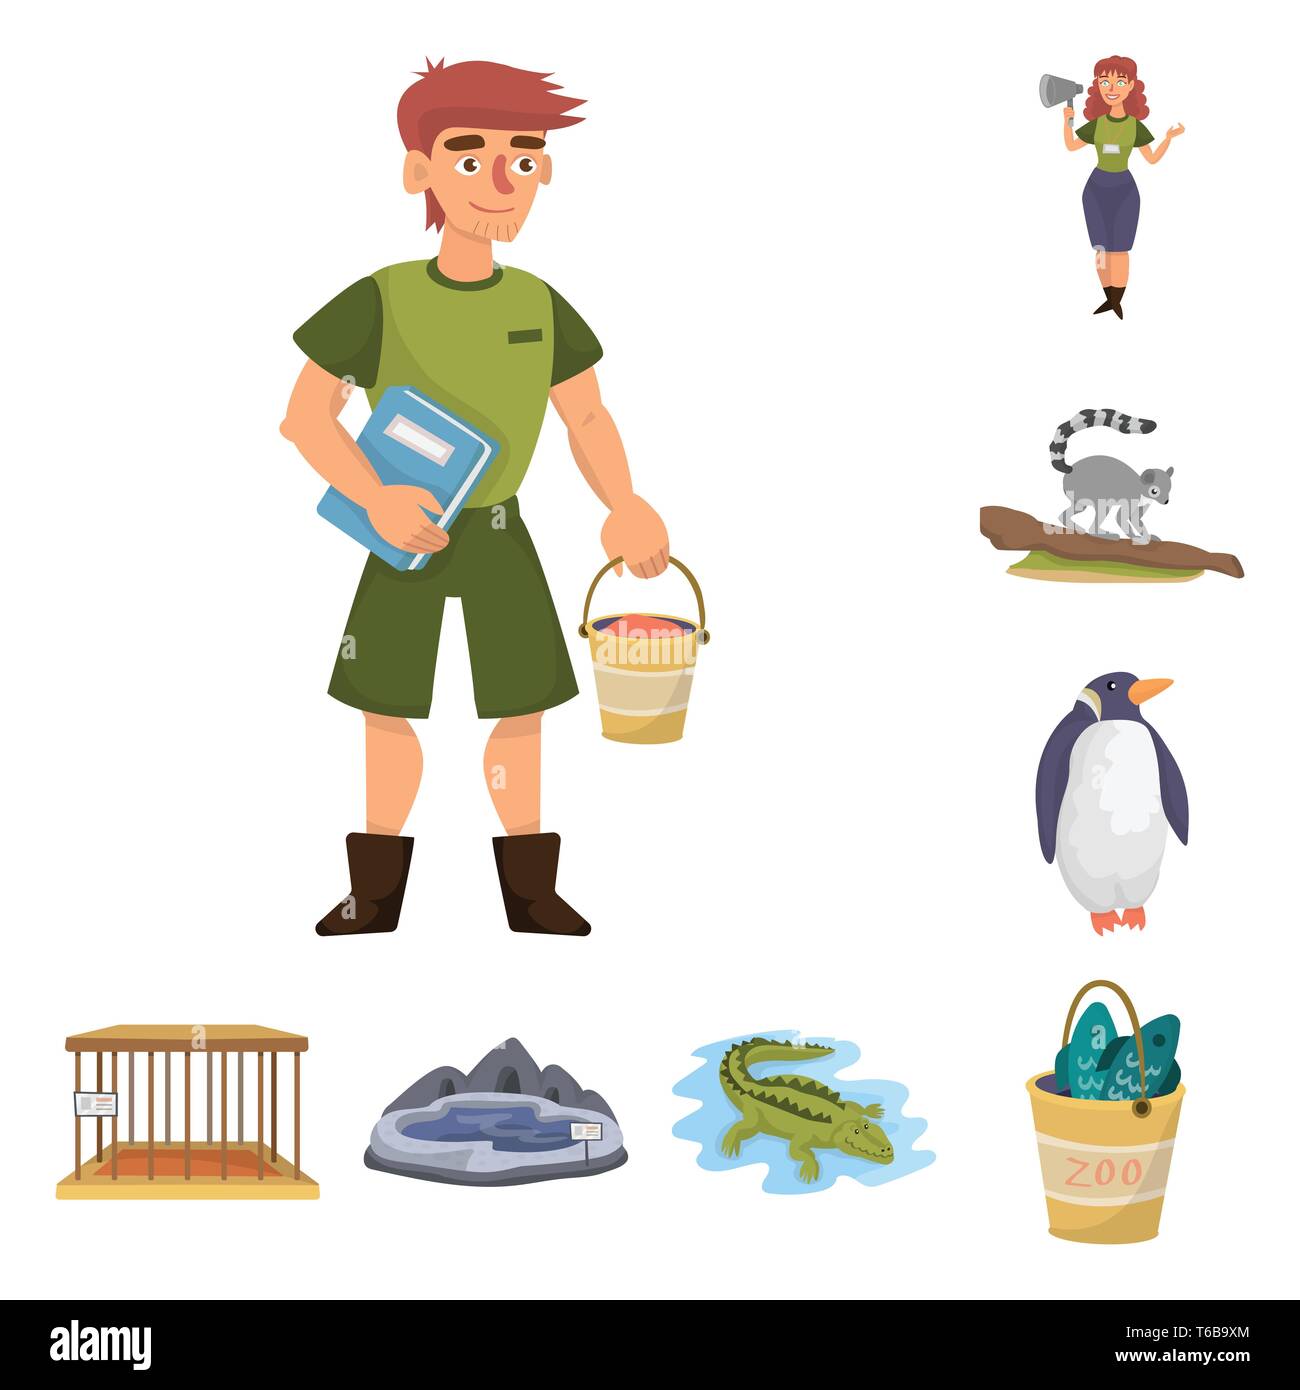 zookeeper,lemur,penguin,cell,lake,crocodile,bucket,man,woman,monkey,white,empty,pool,alligator,fish,worker,megaphone,Africa,cute,jail,water,full,keeper,tree,wild,metal,stone,fishing,zoo,park,safari,animal,forest,nature,fun,flora,fauna,entertainment,set,vector,icon,illustration,isolated,collection,design,element,graphic,sign,cartoon,color Vector Vectors , Stock Vector